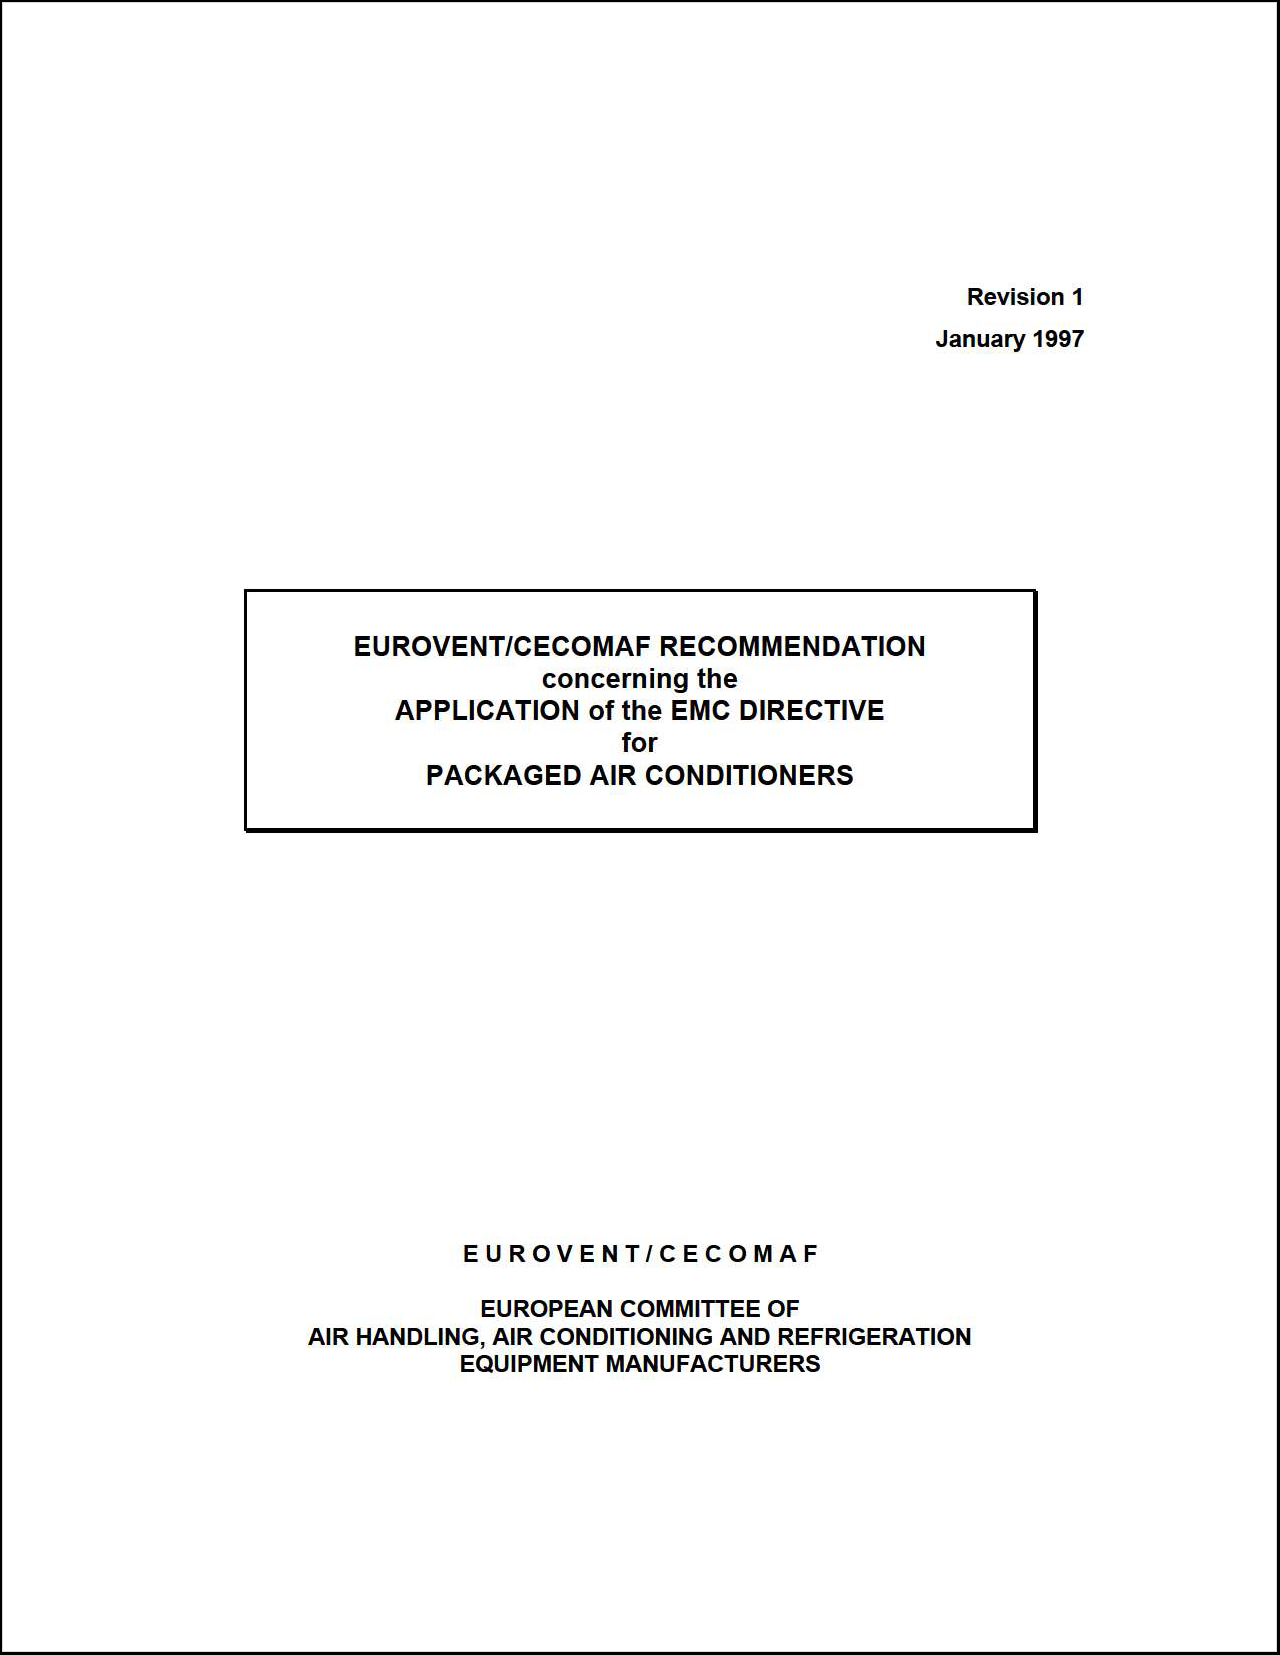 1997 - Application of the EMC Directive for Packaged Air Conditioners